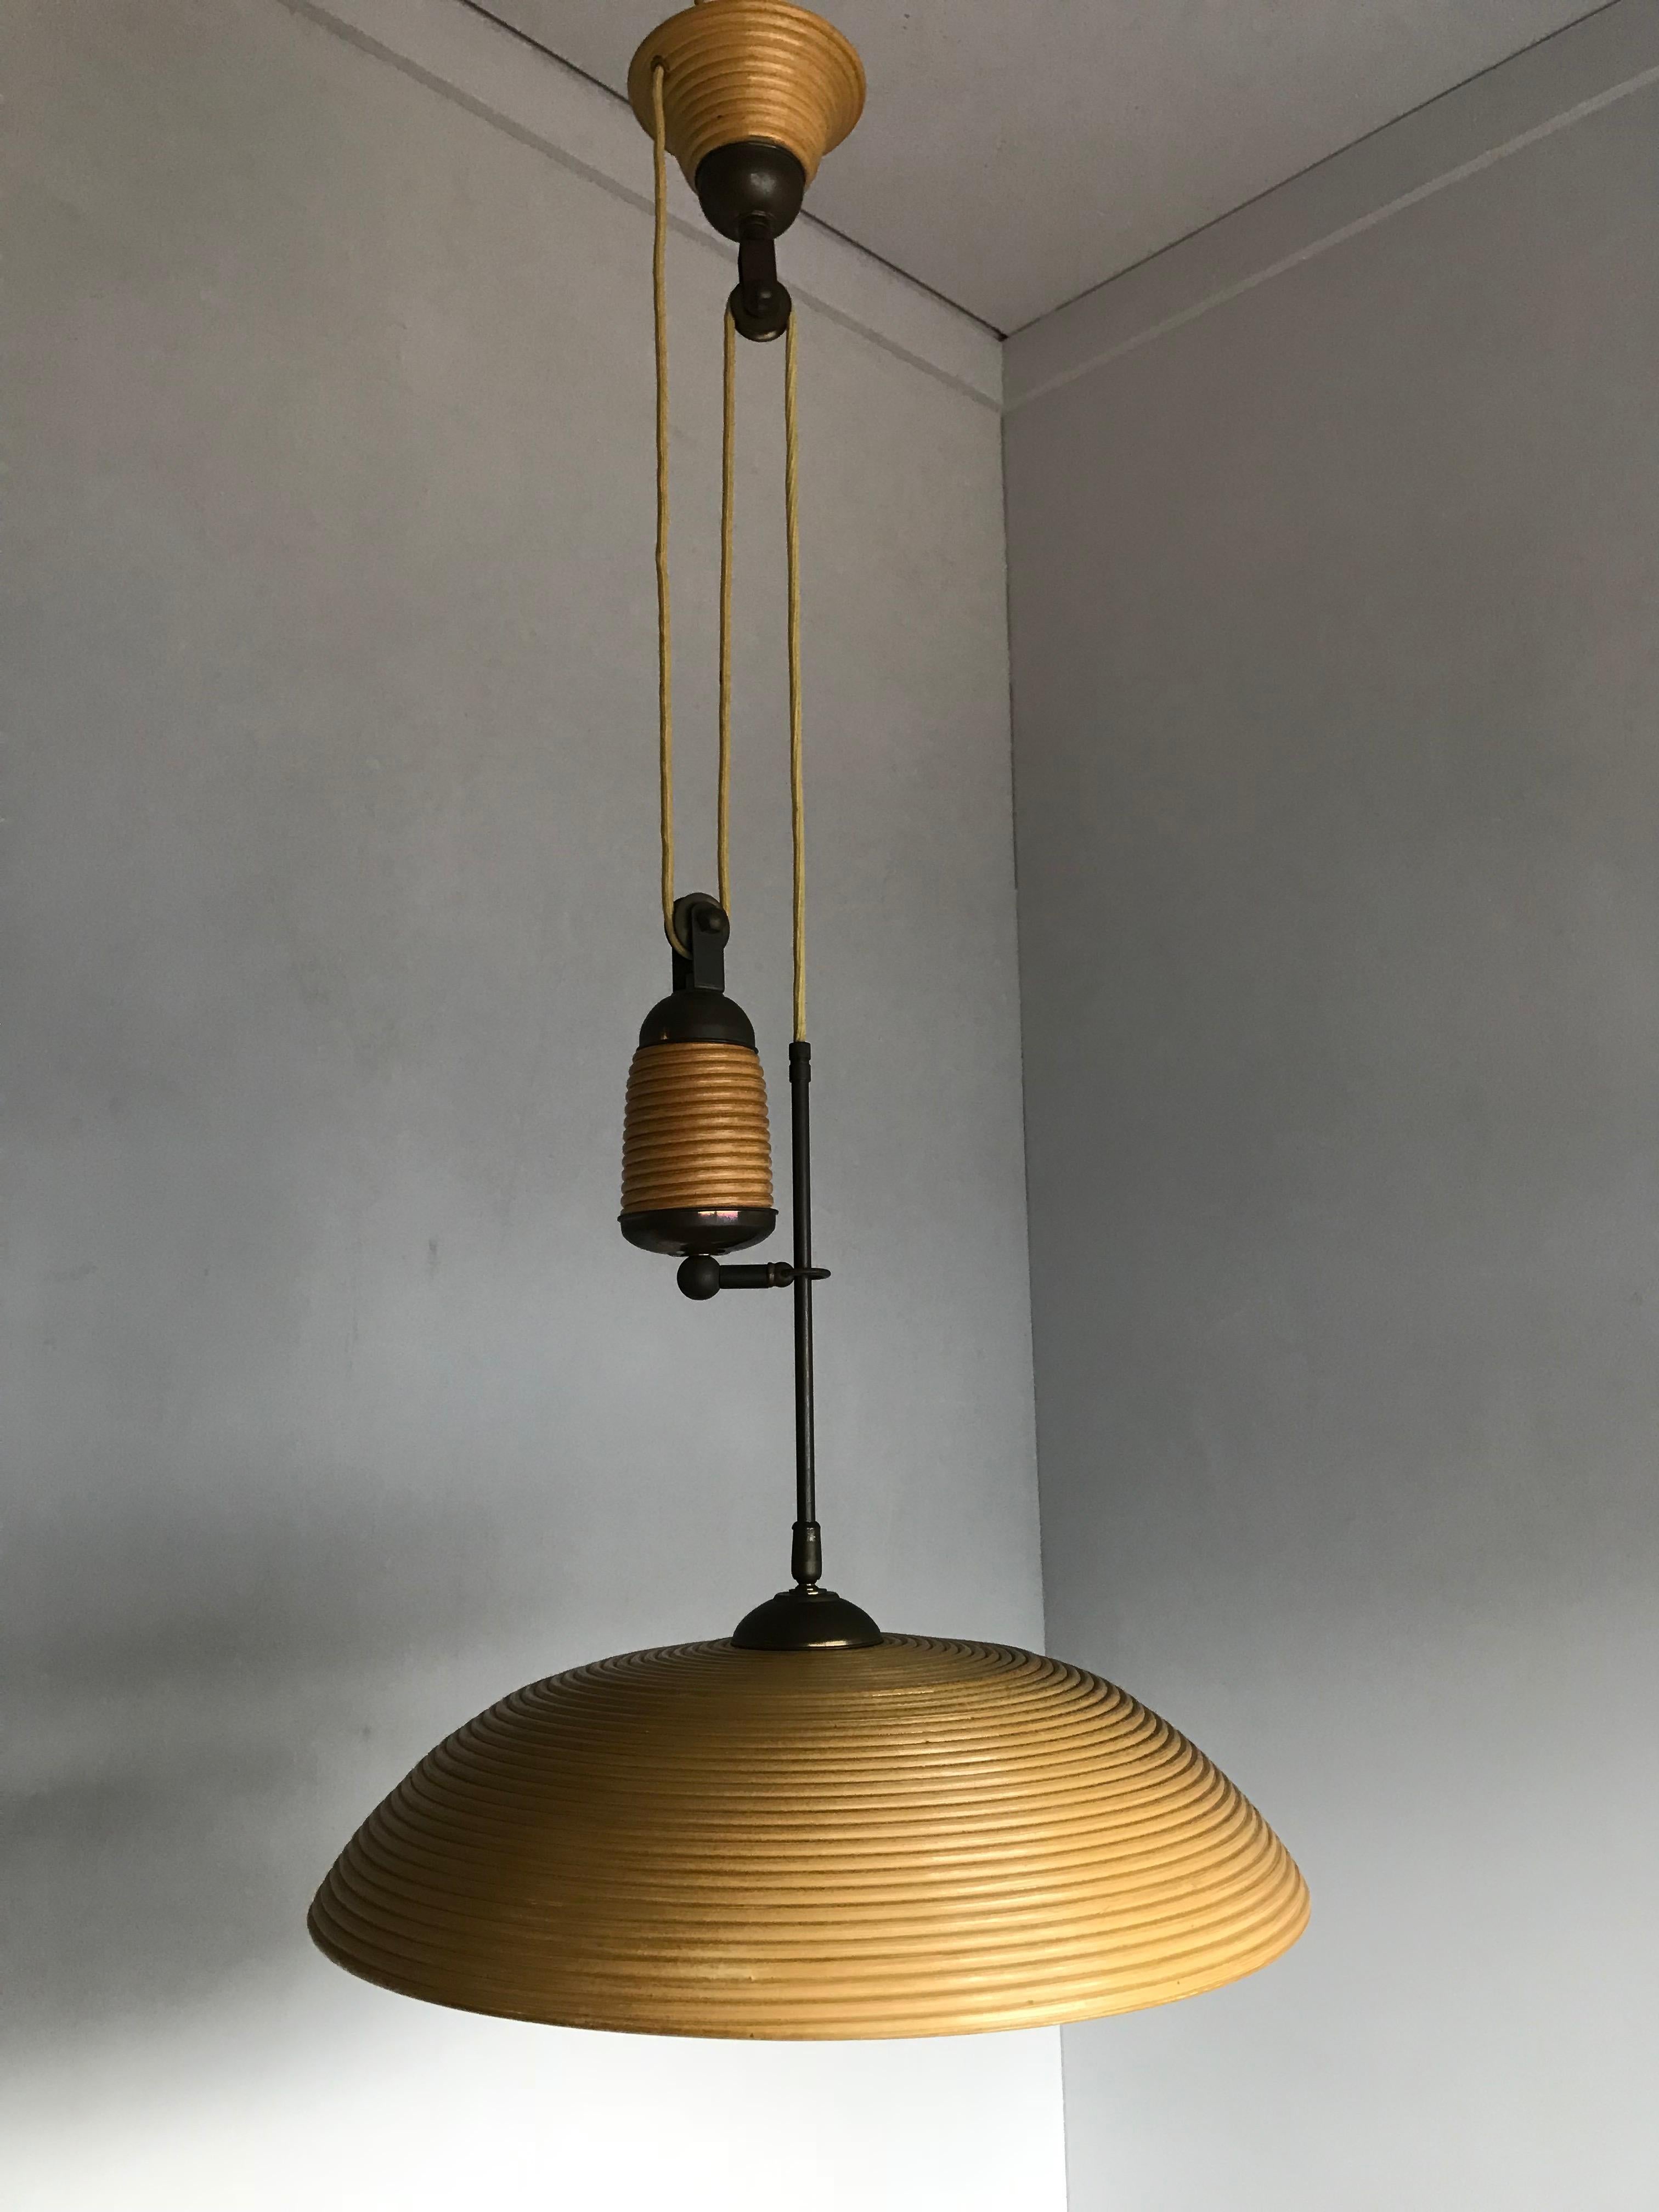 Rare and Handcrafted Mid-Century Modern Rattan and Brass Pendant Light, Lamp 11